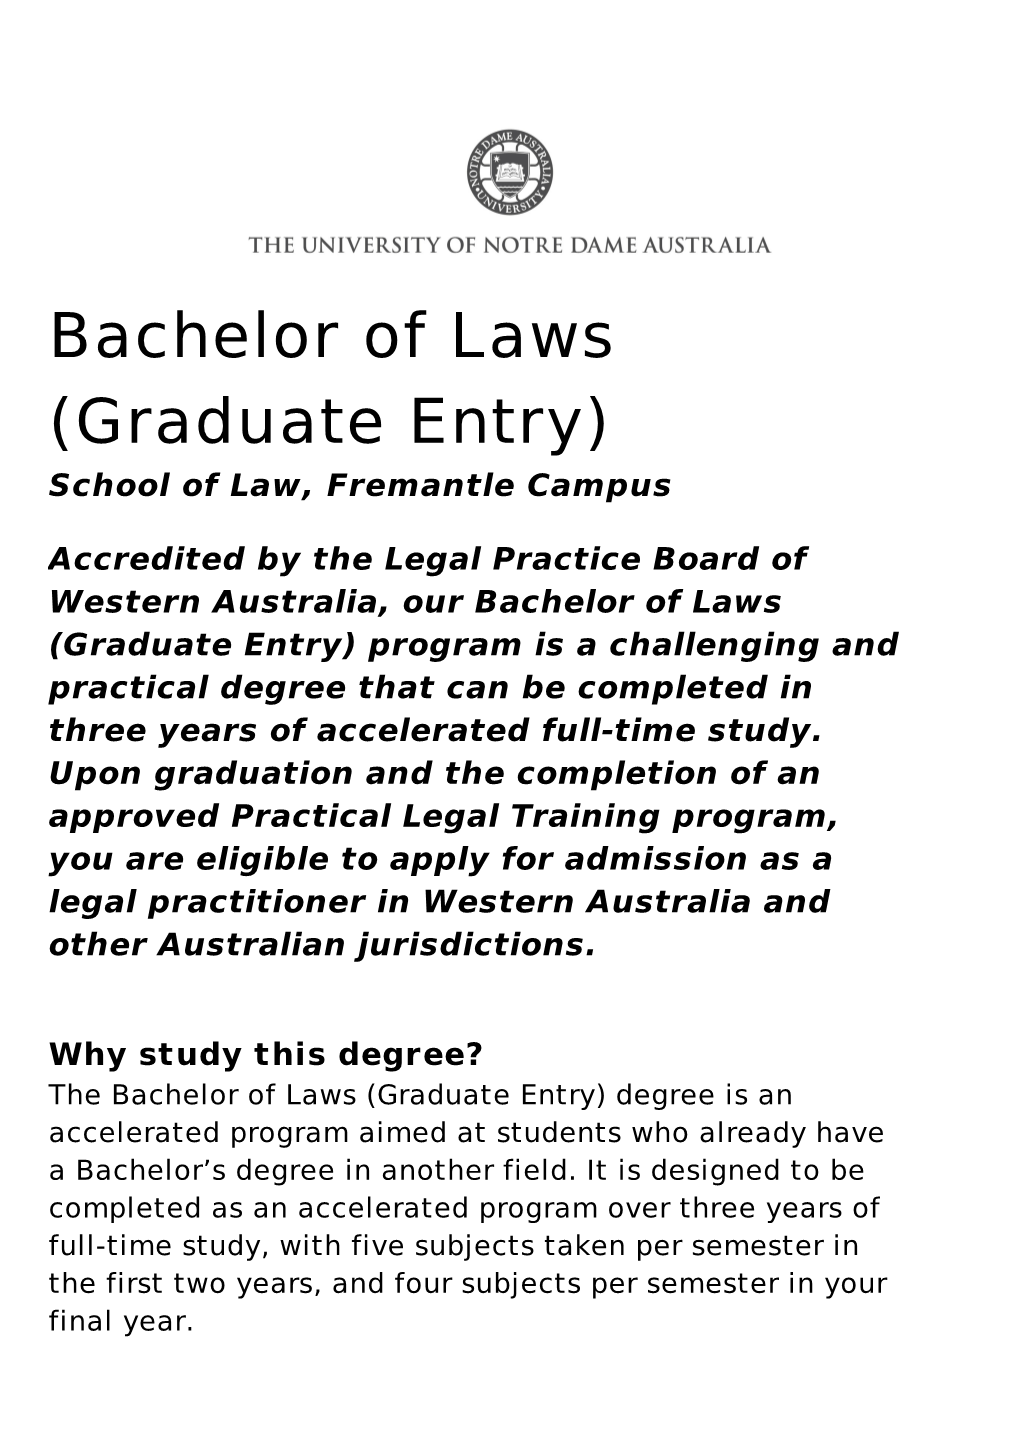 Bachelor of Laws (Graduate Entry) School of Law, Fremantle Campus